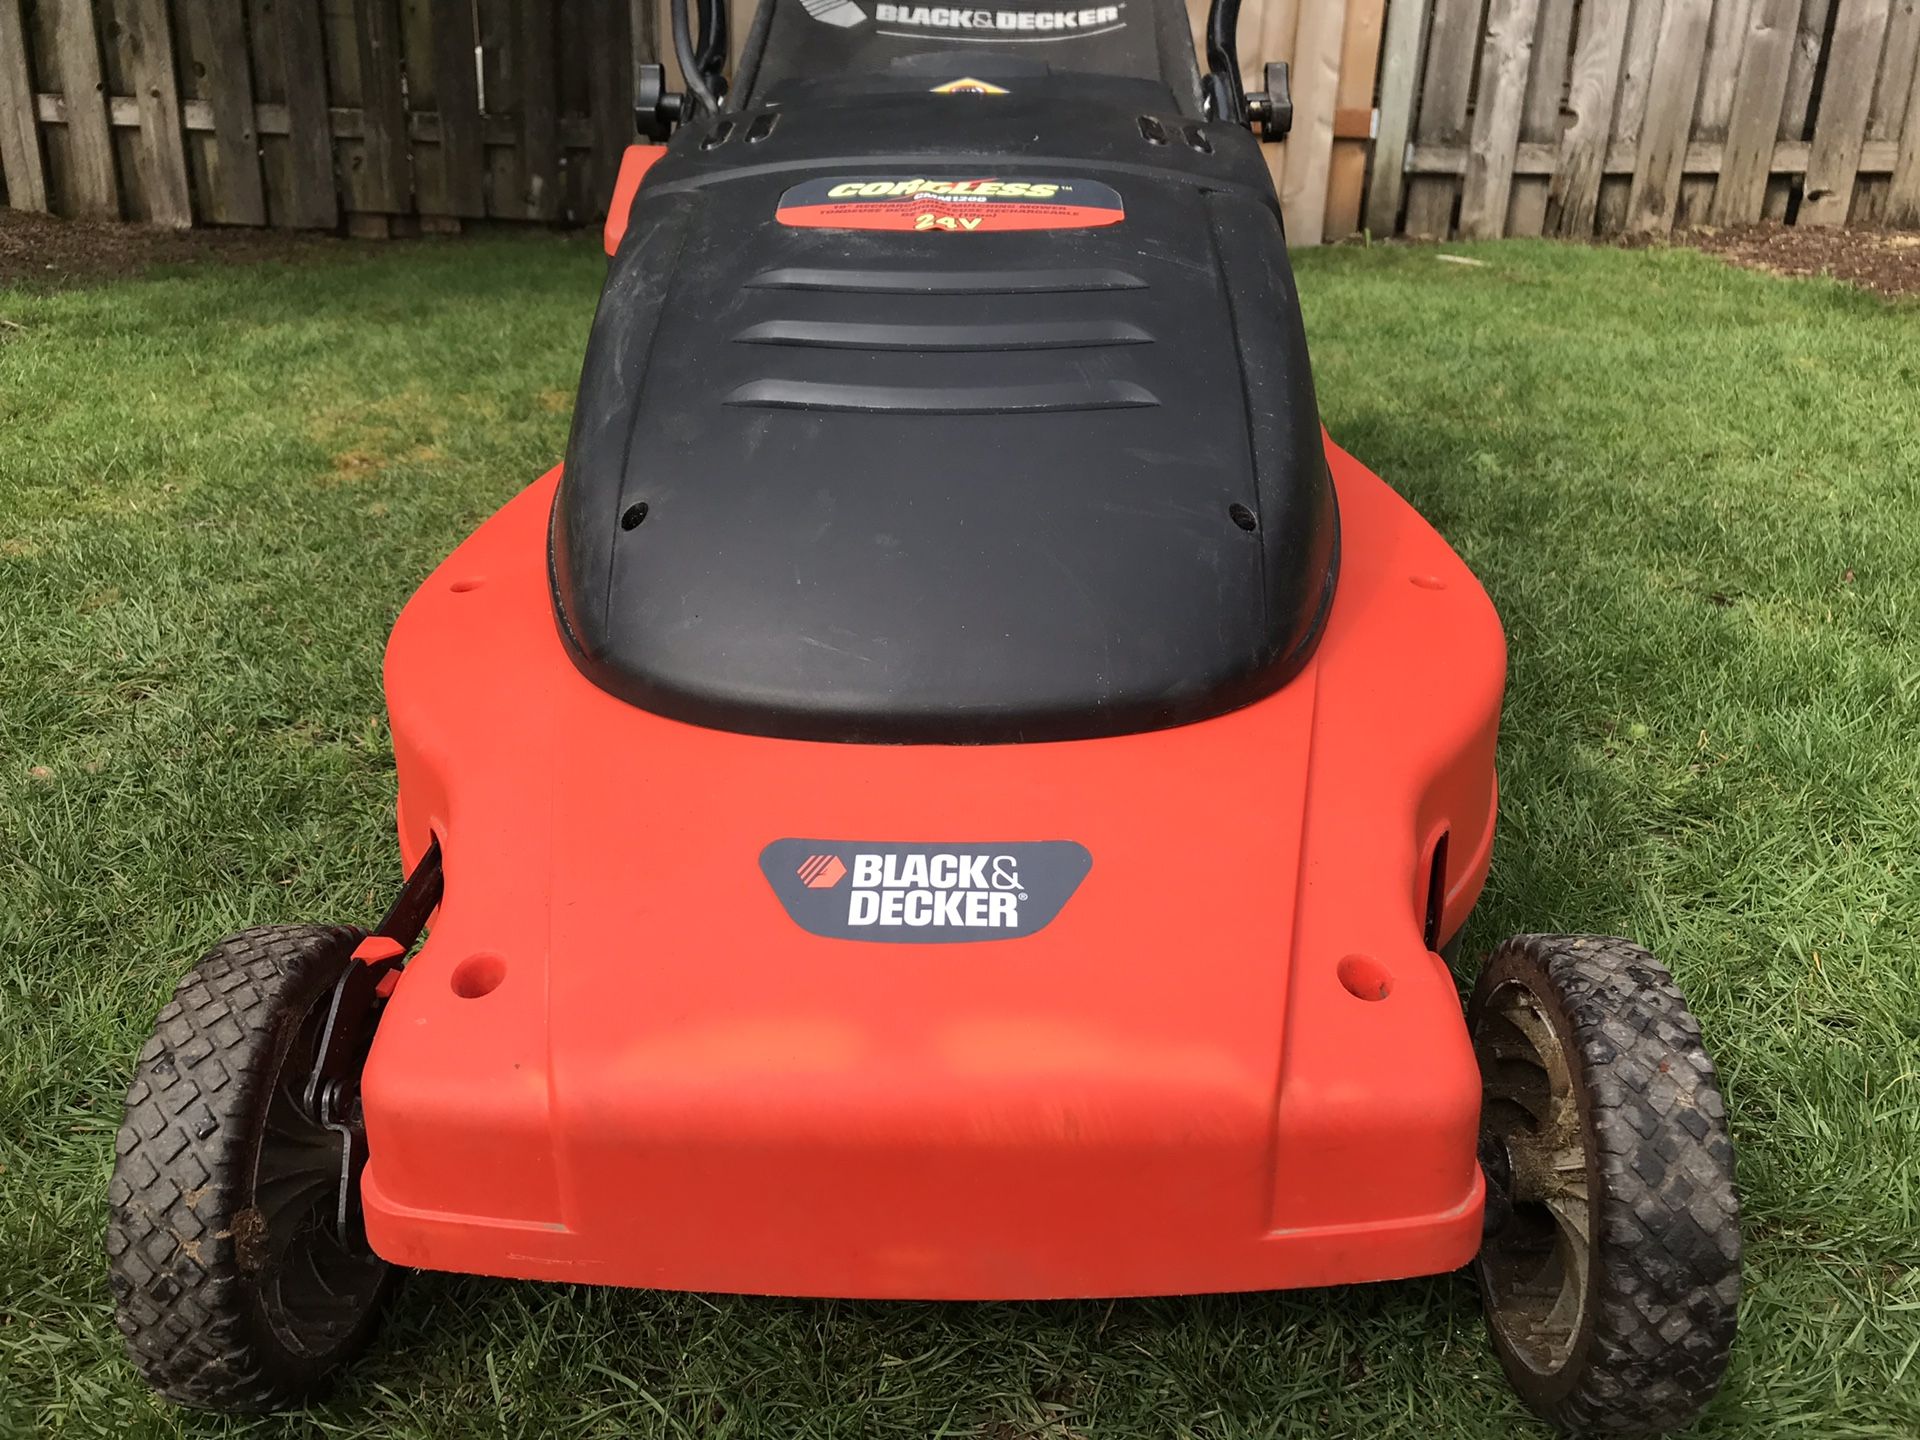 BLACK+DECKER Electric Lawn Mower, 12-Amp, 17-Inch, Corded (BEMW482ES) for  Sale in Cleveland, OH - OfferUp